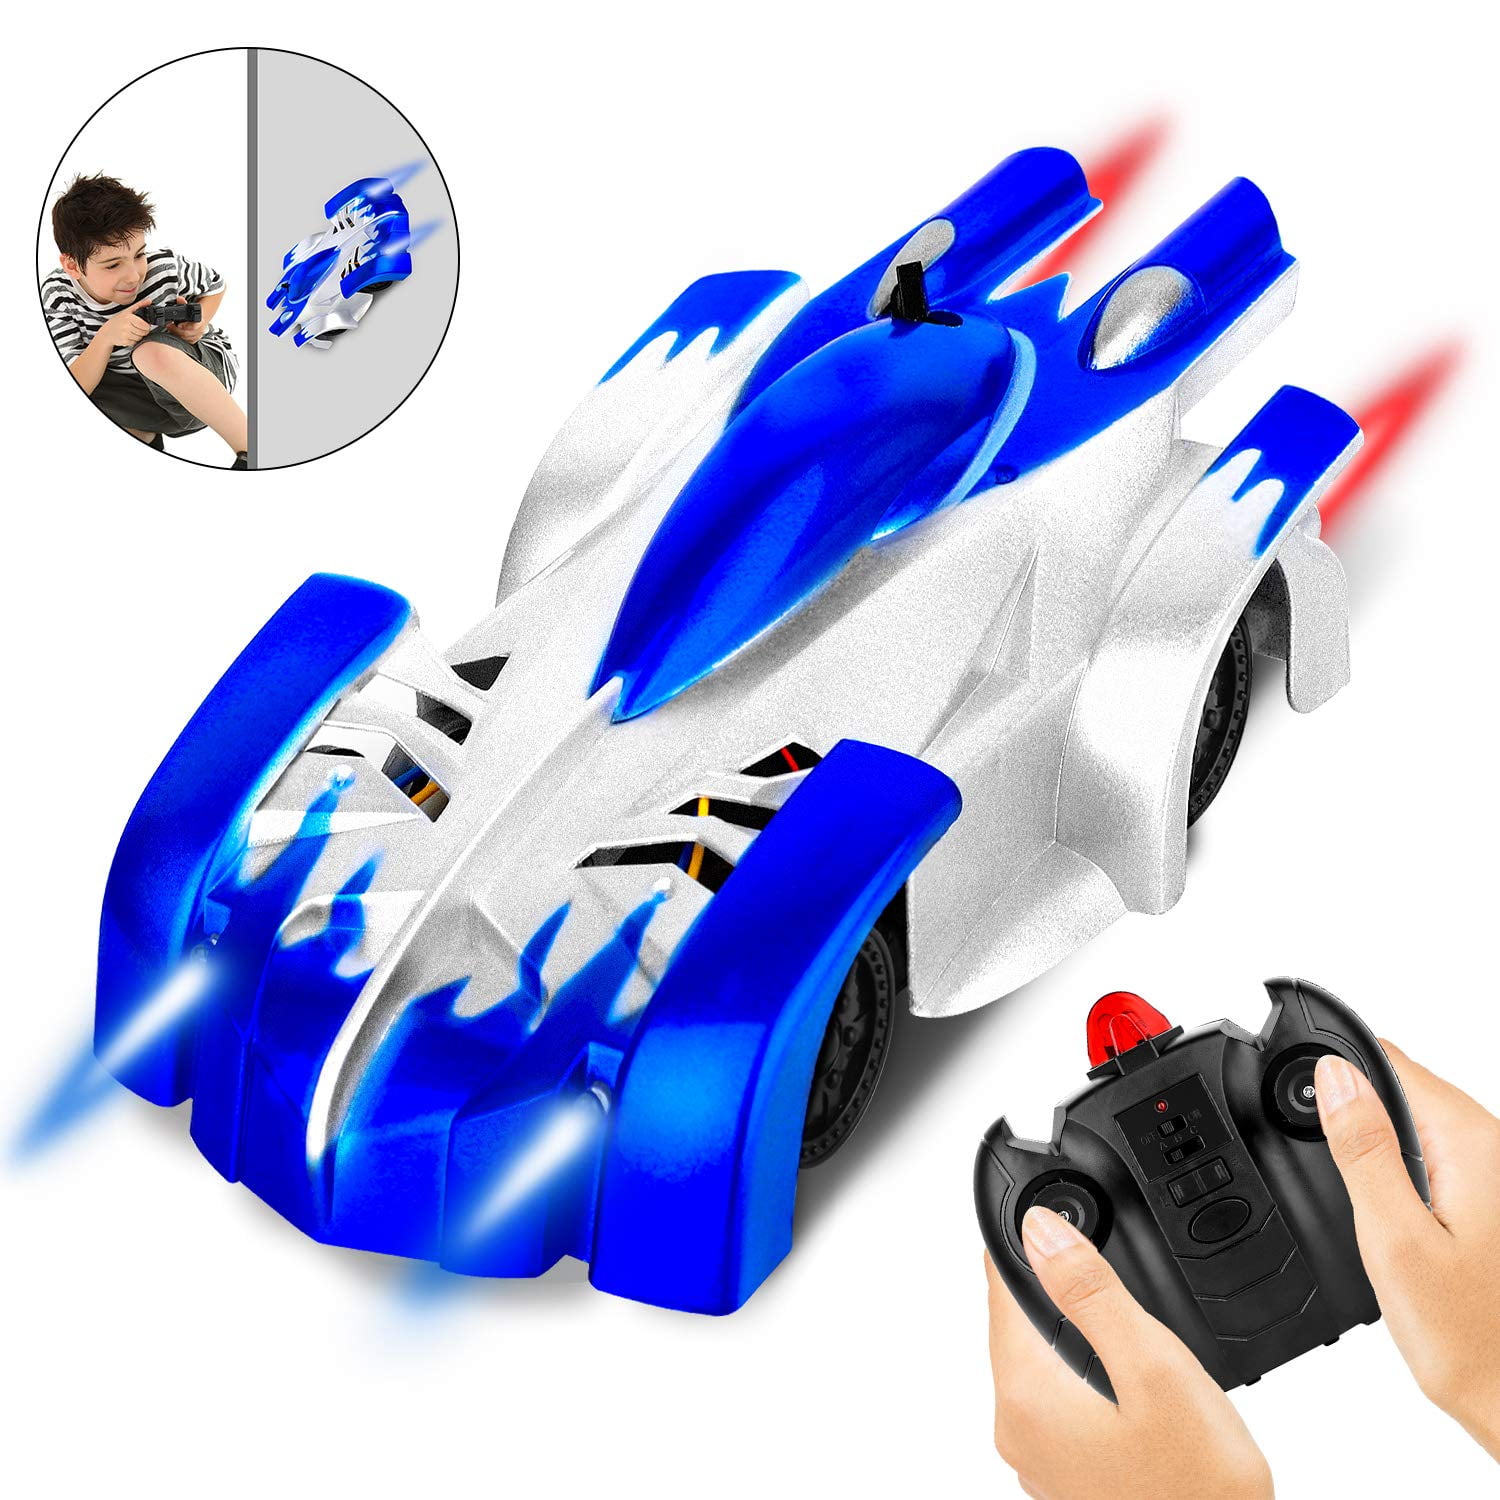 Gravity Defying RC Car Remote Control Latest Mini Racer Car Toy for Christmas 